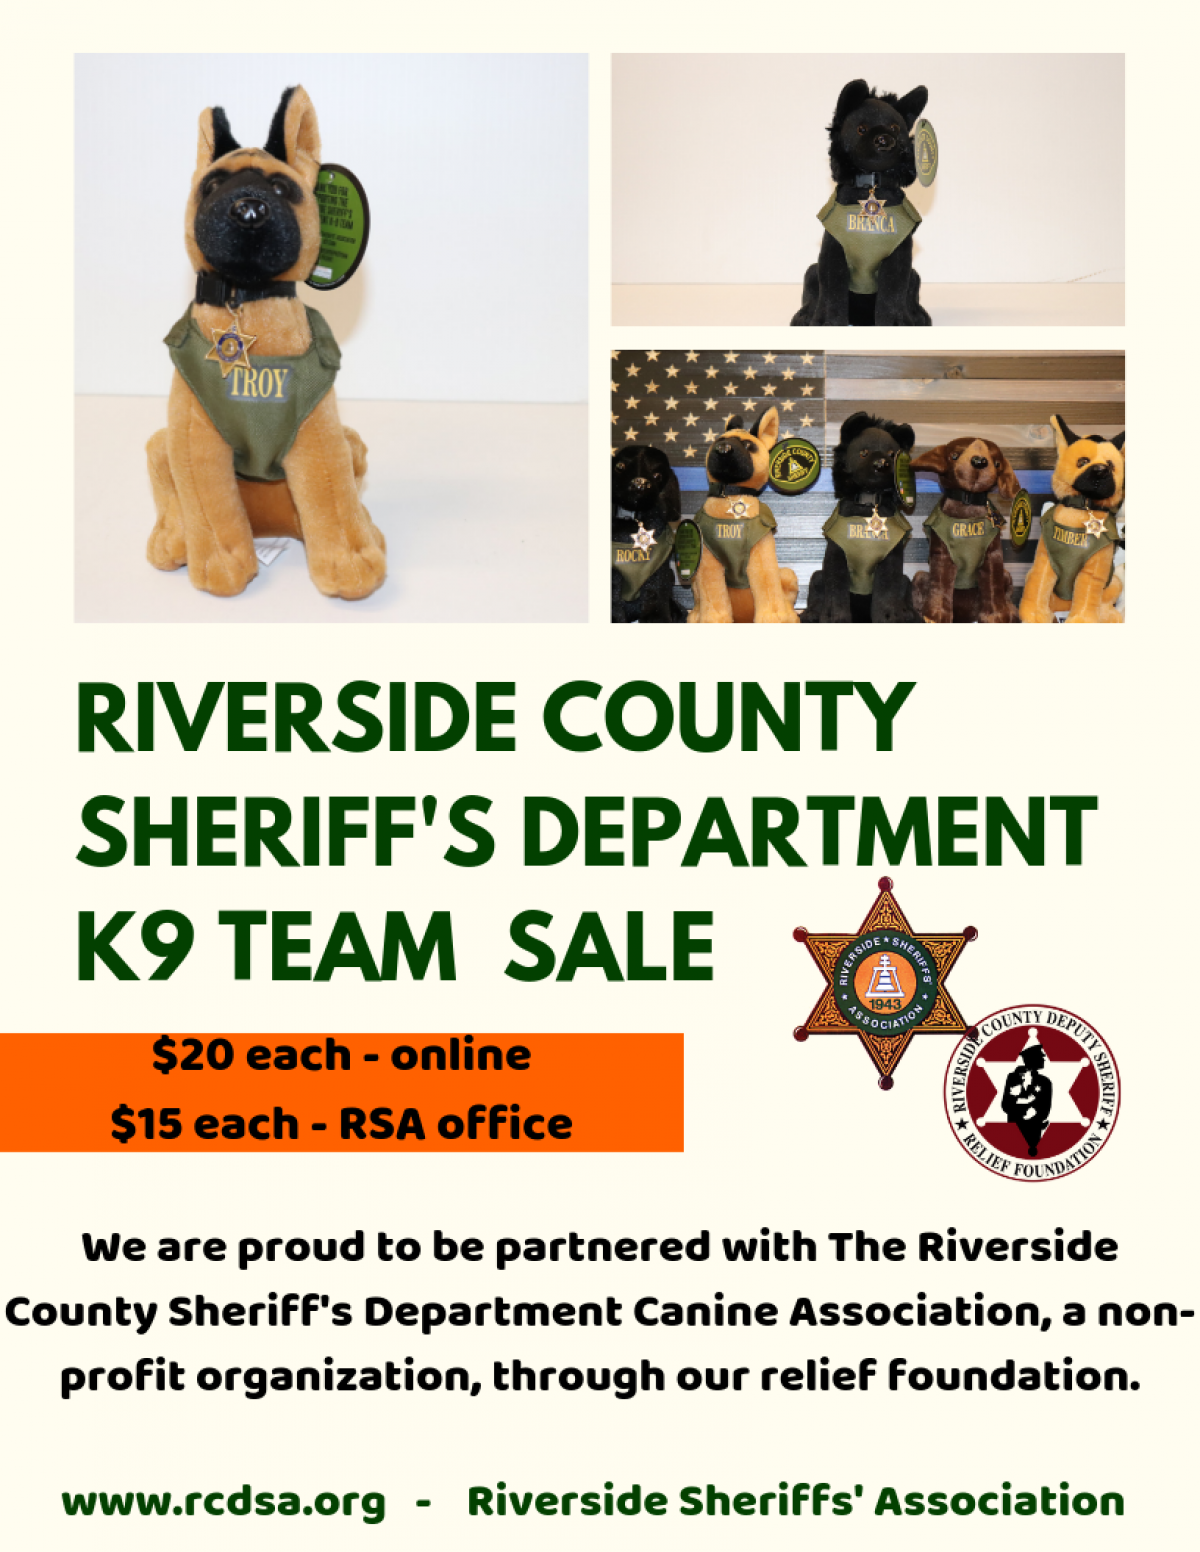 stuffed animal dogs for sale